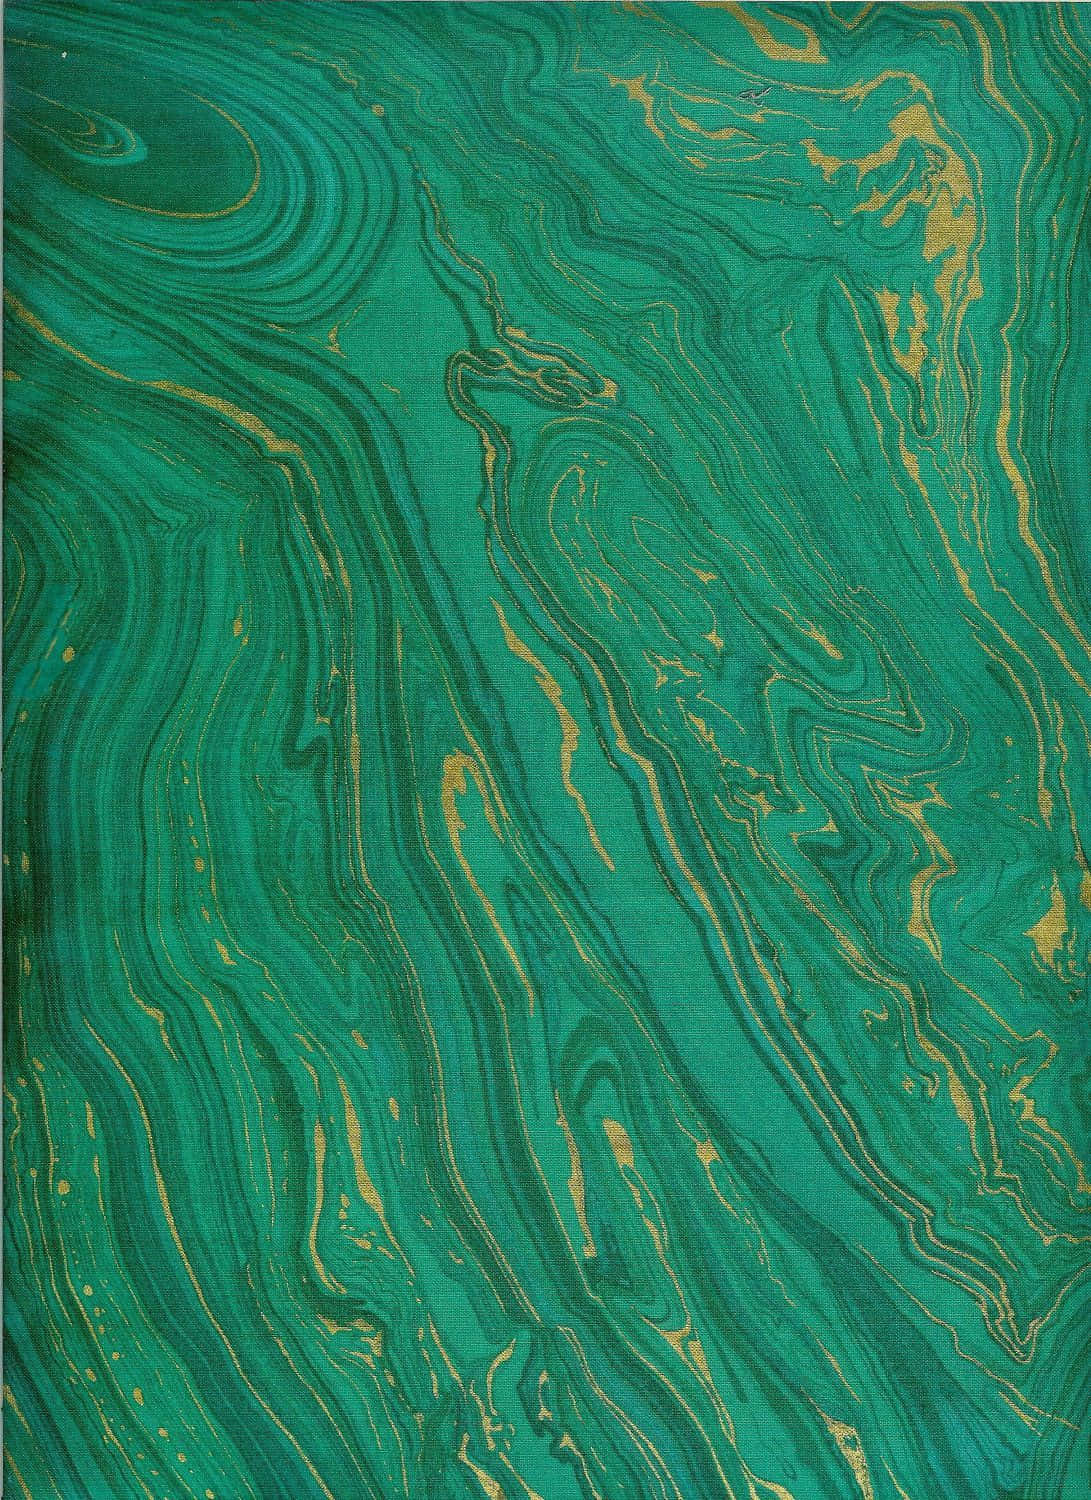 Stunning Marble iPhone Background with Intricate Details